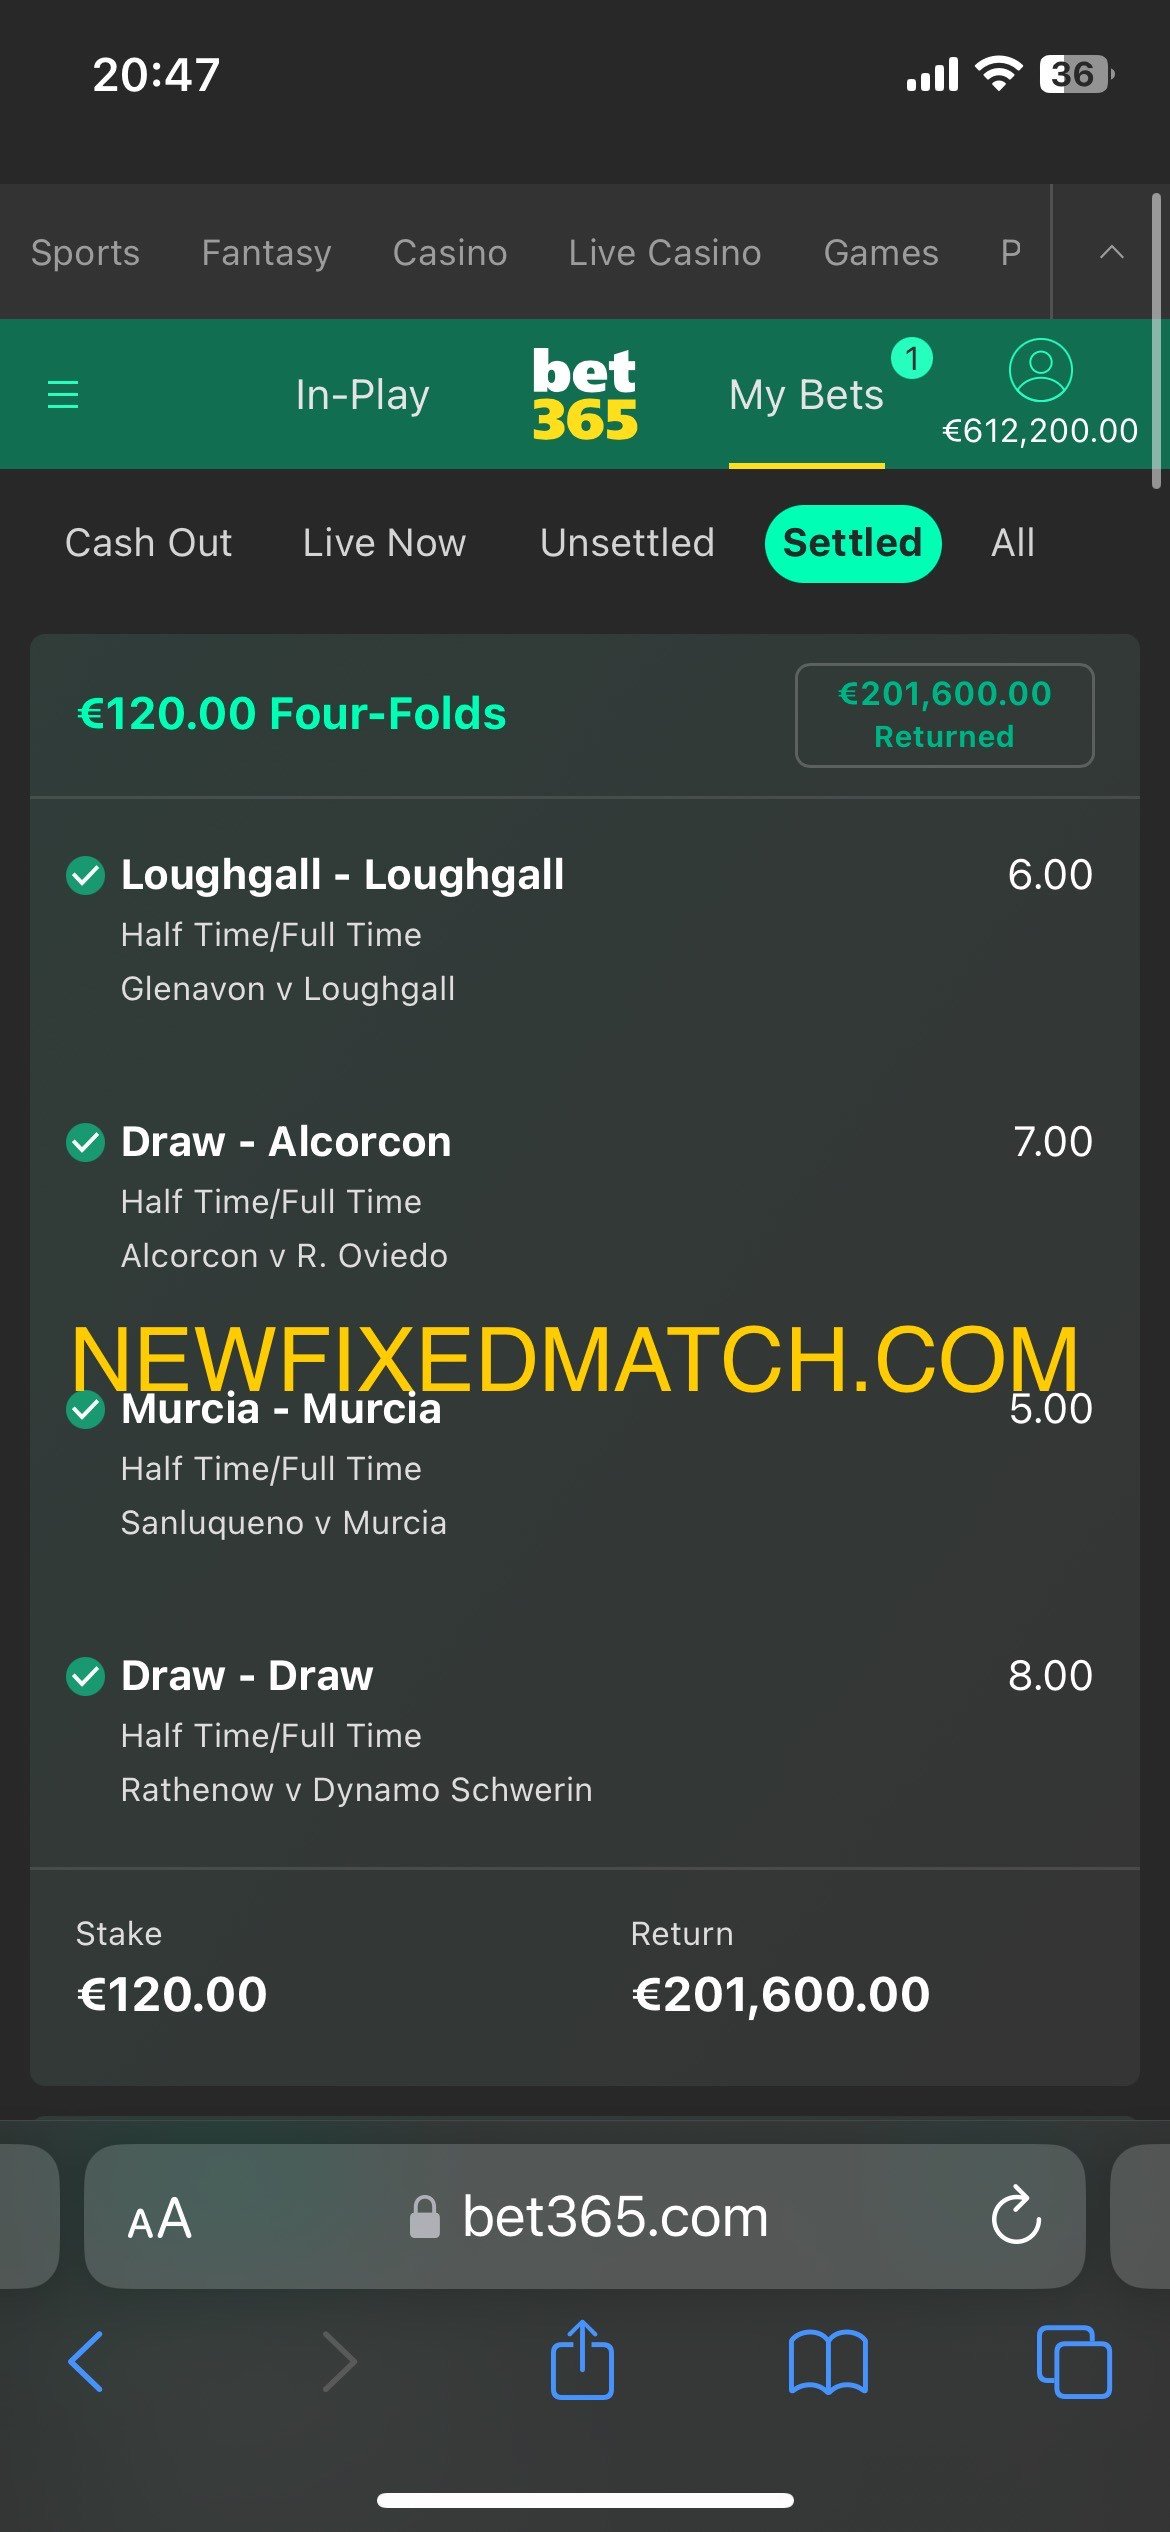 Today Fixed Matches